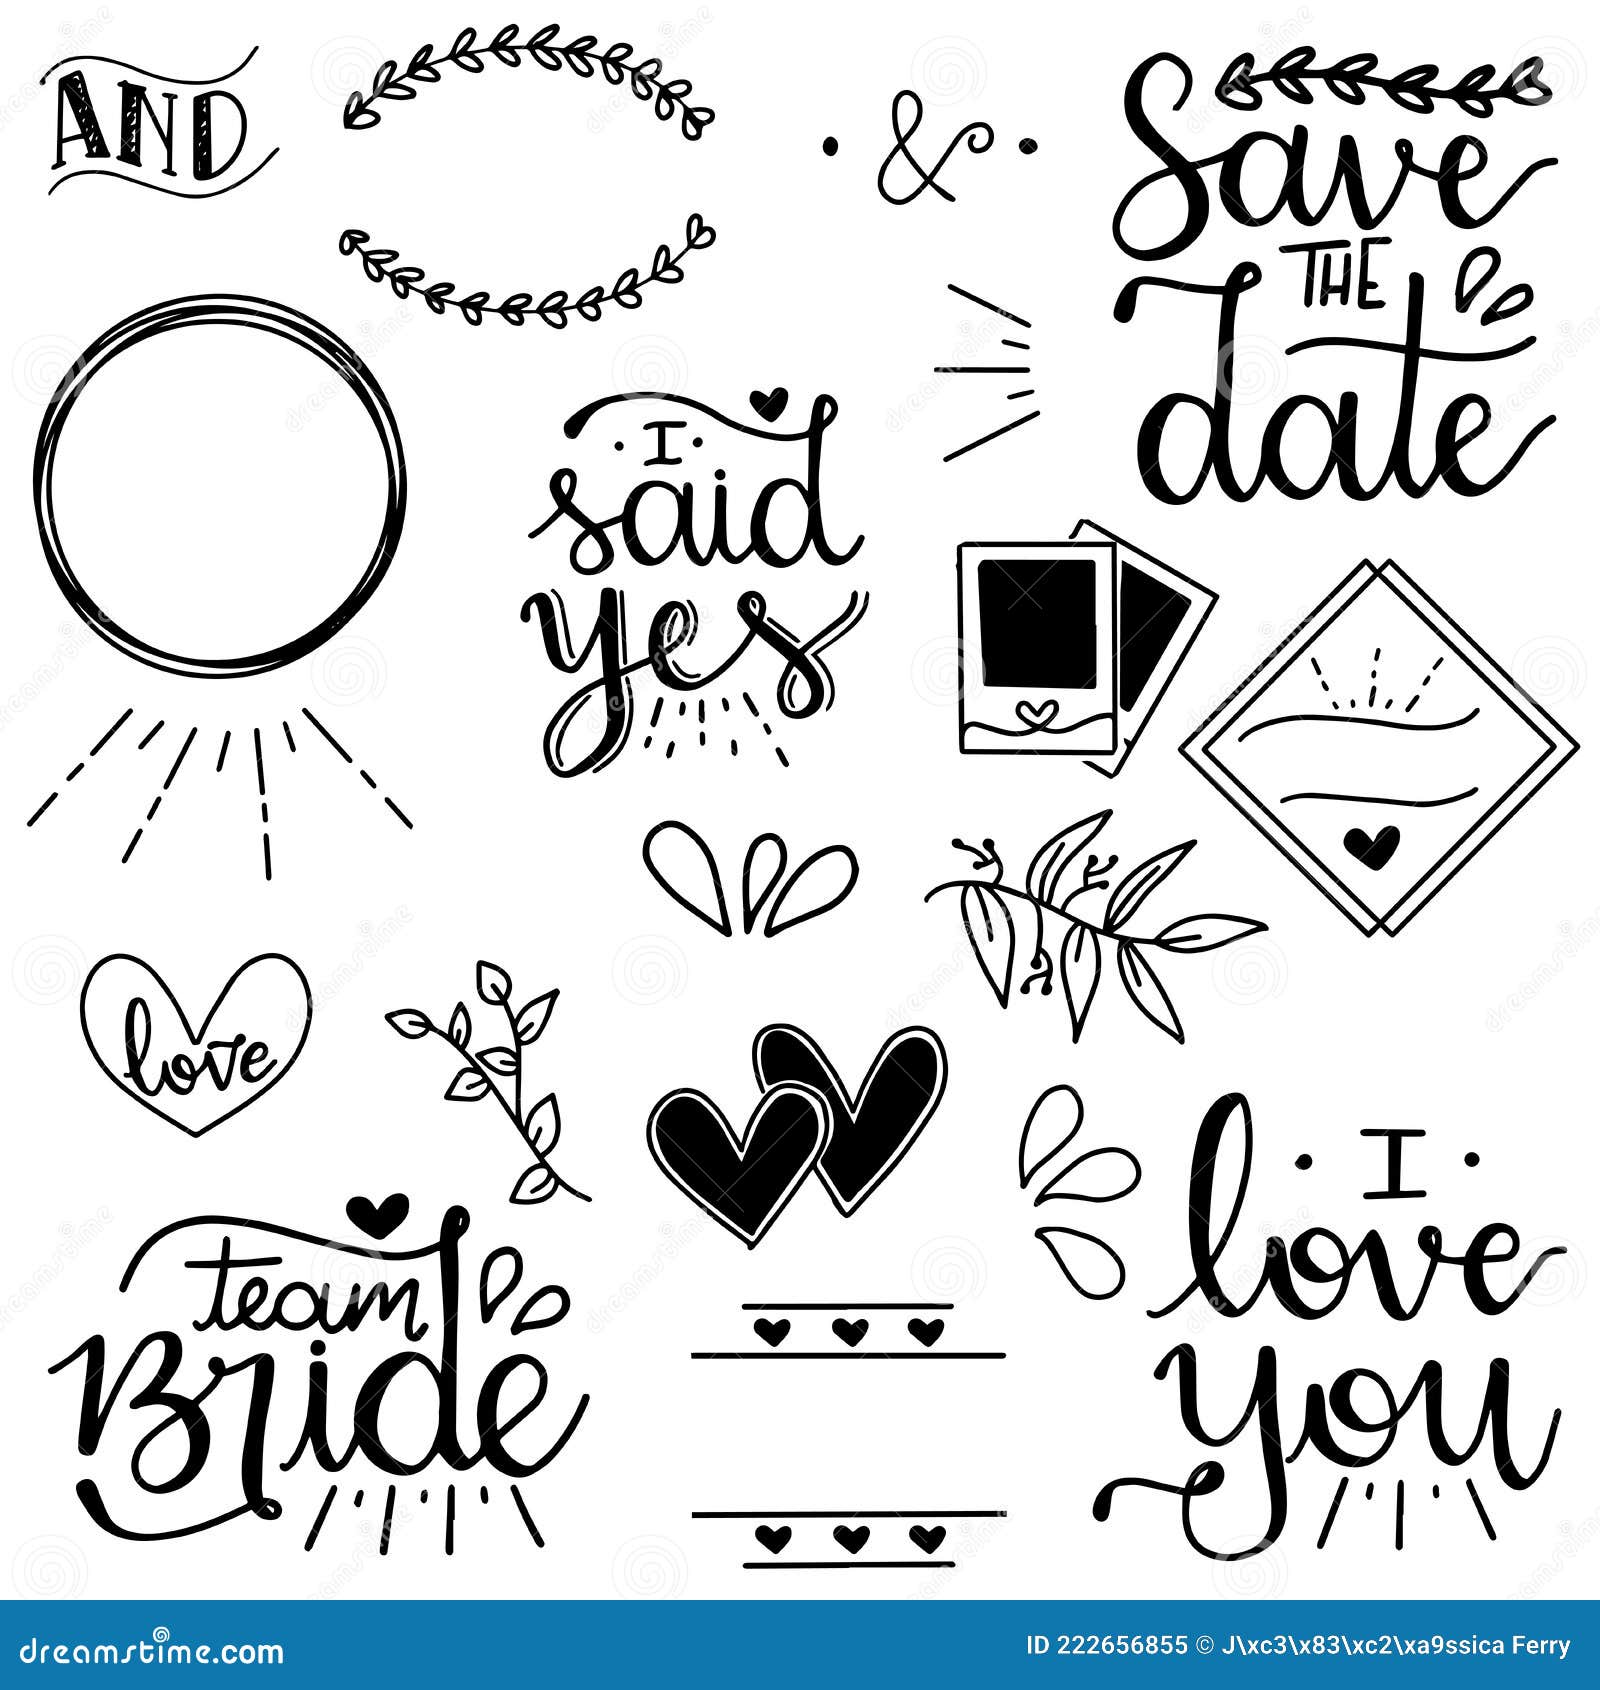 wedding icons s ornaments - team bride save the date 